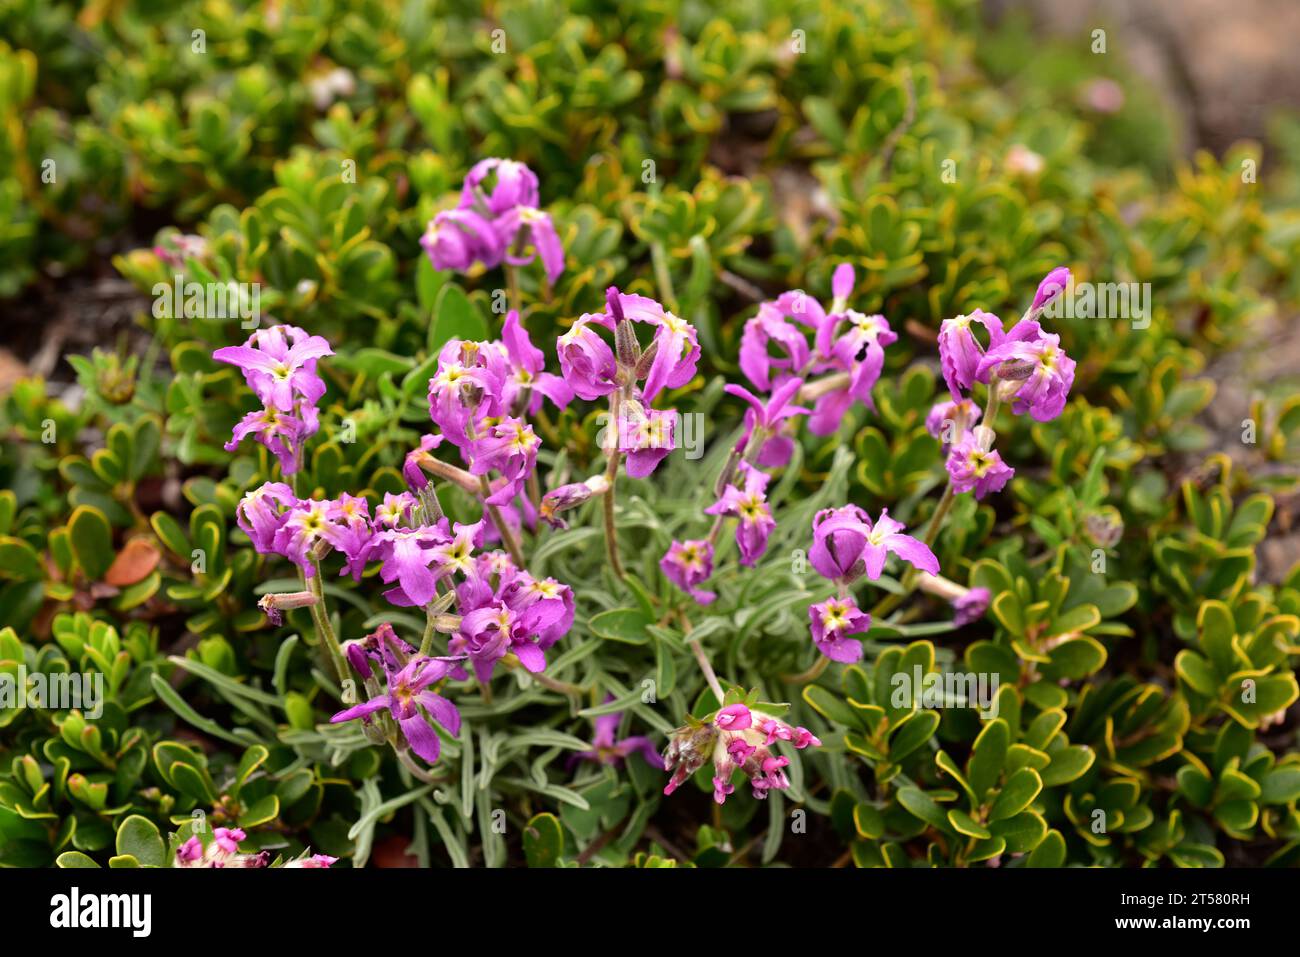 Matthiola fruticulosa perennis or Matthiola perennis is a perennial plant endemic to Cantabrian Mountains. This photo was taken in Somiedo Natural Par Stock Photo